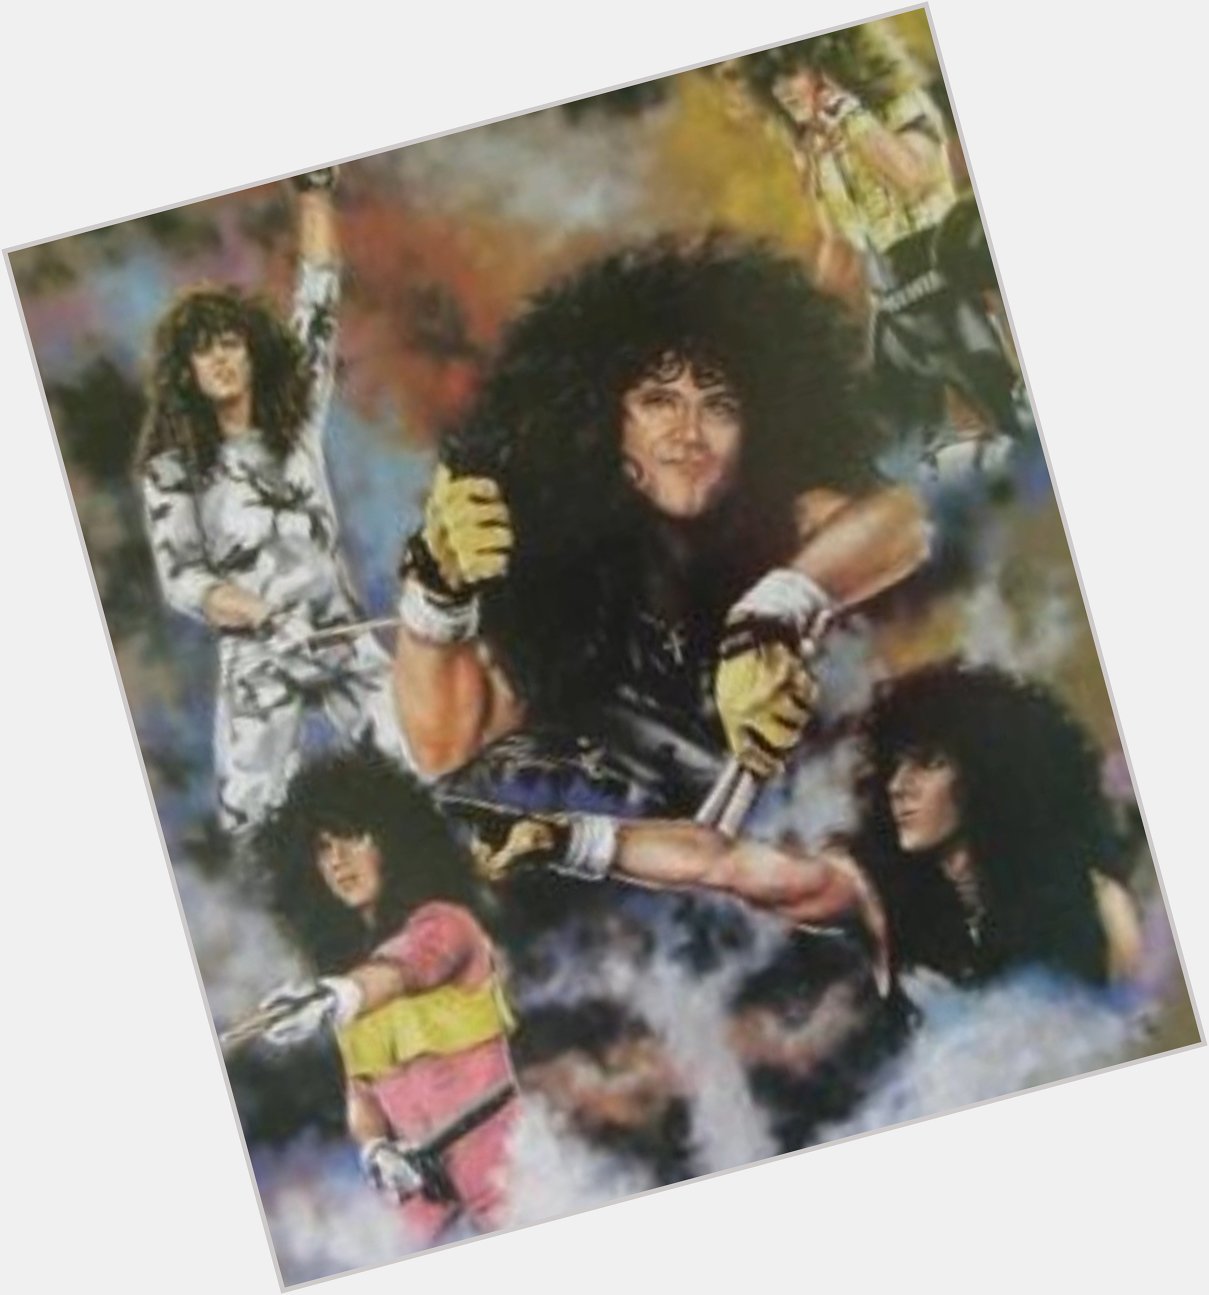 Happy Birthday Eric Carr.  RIP.  You have not been forgotten! 